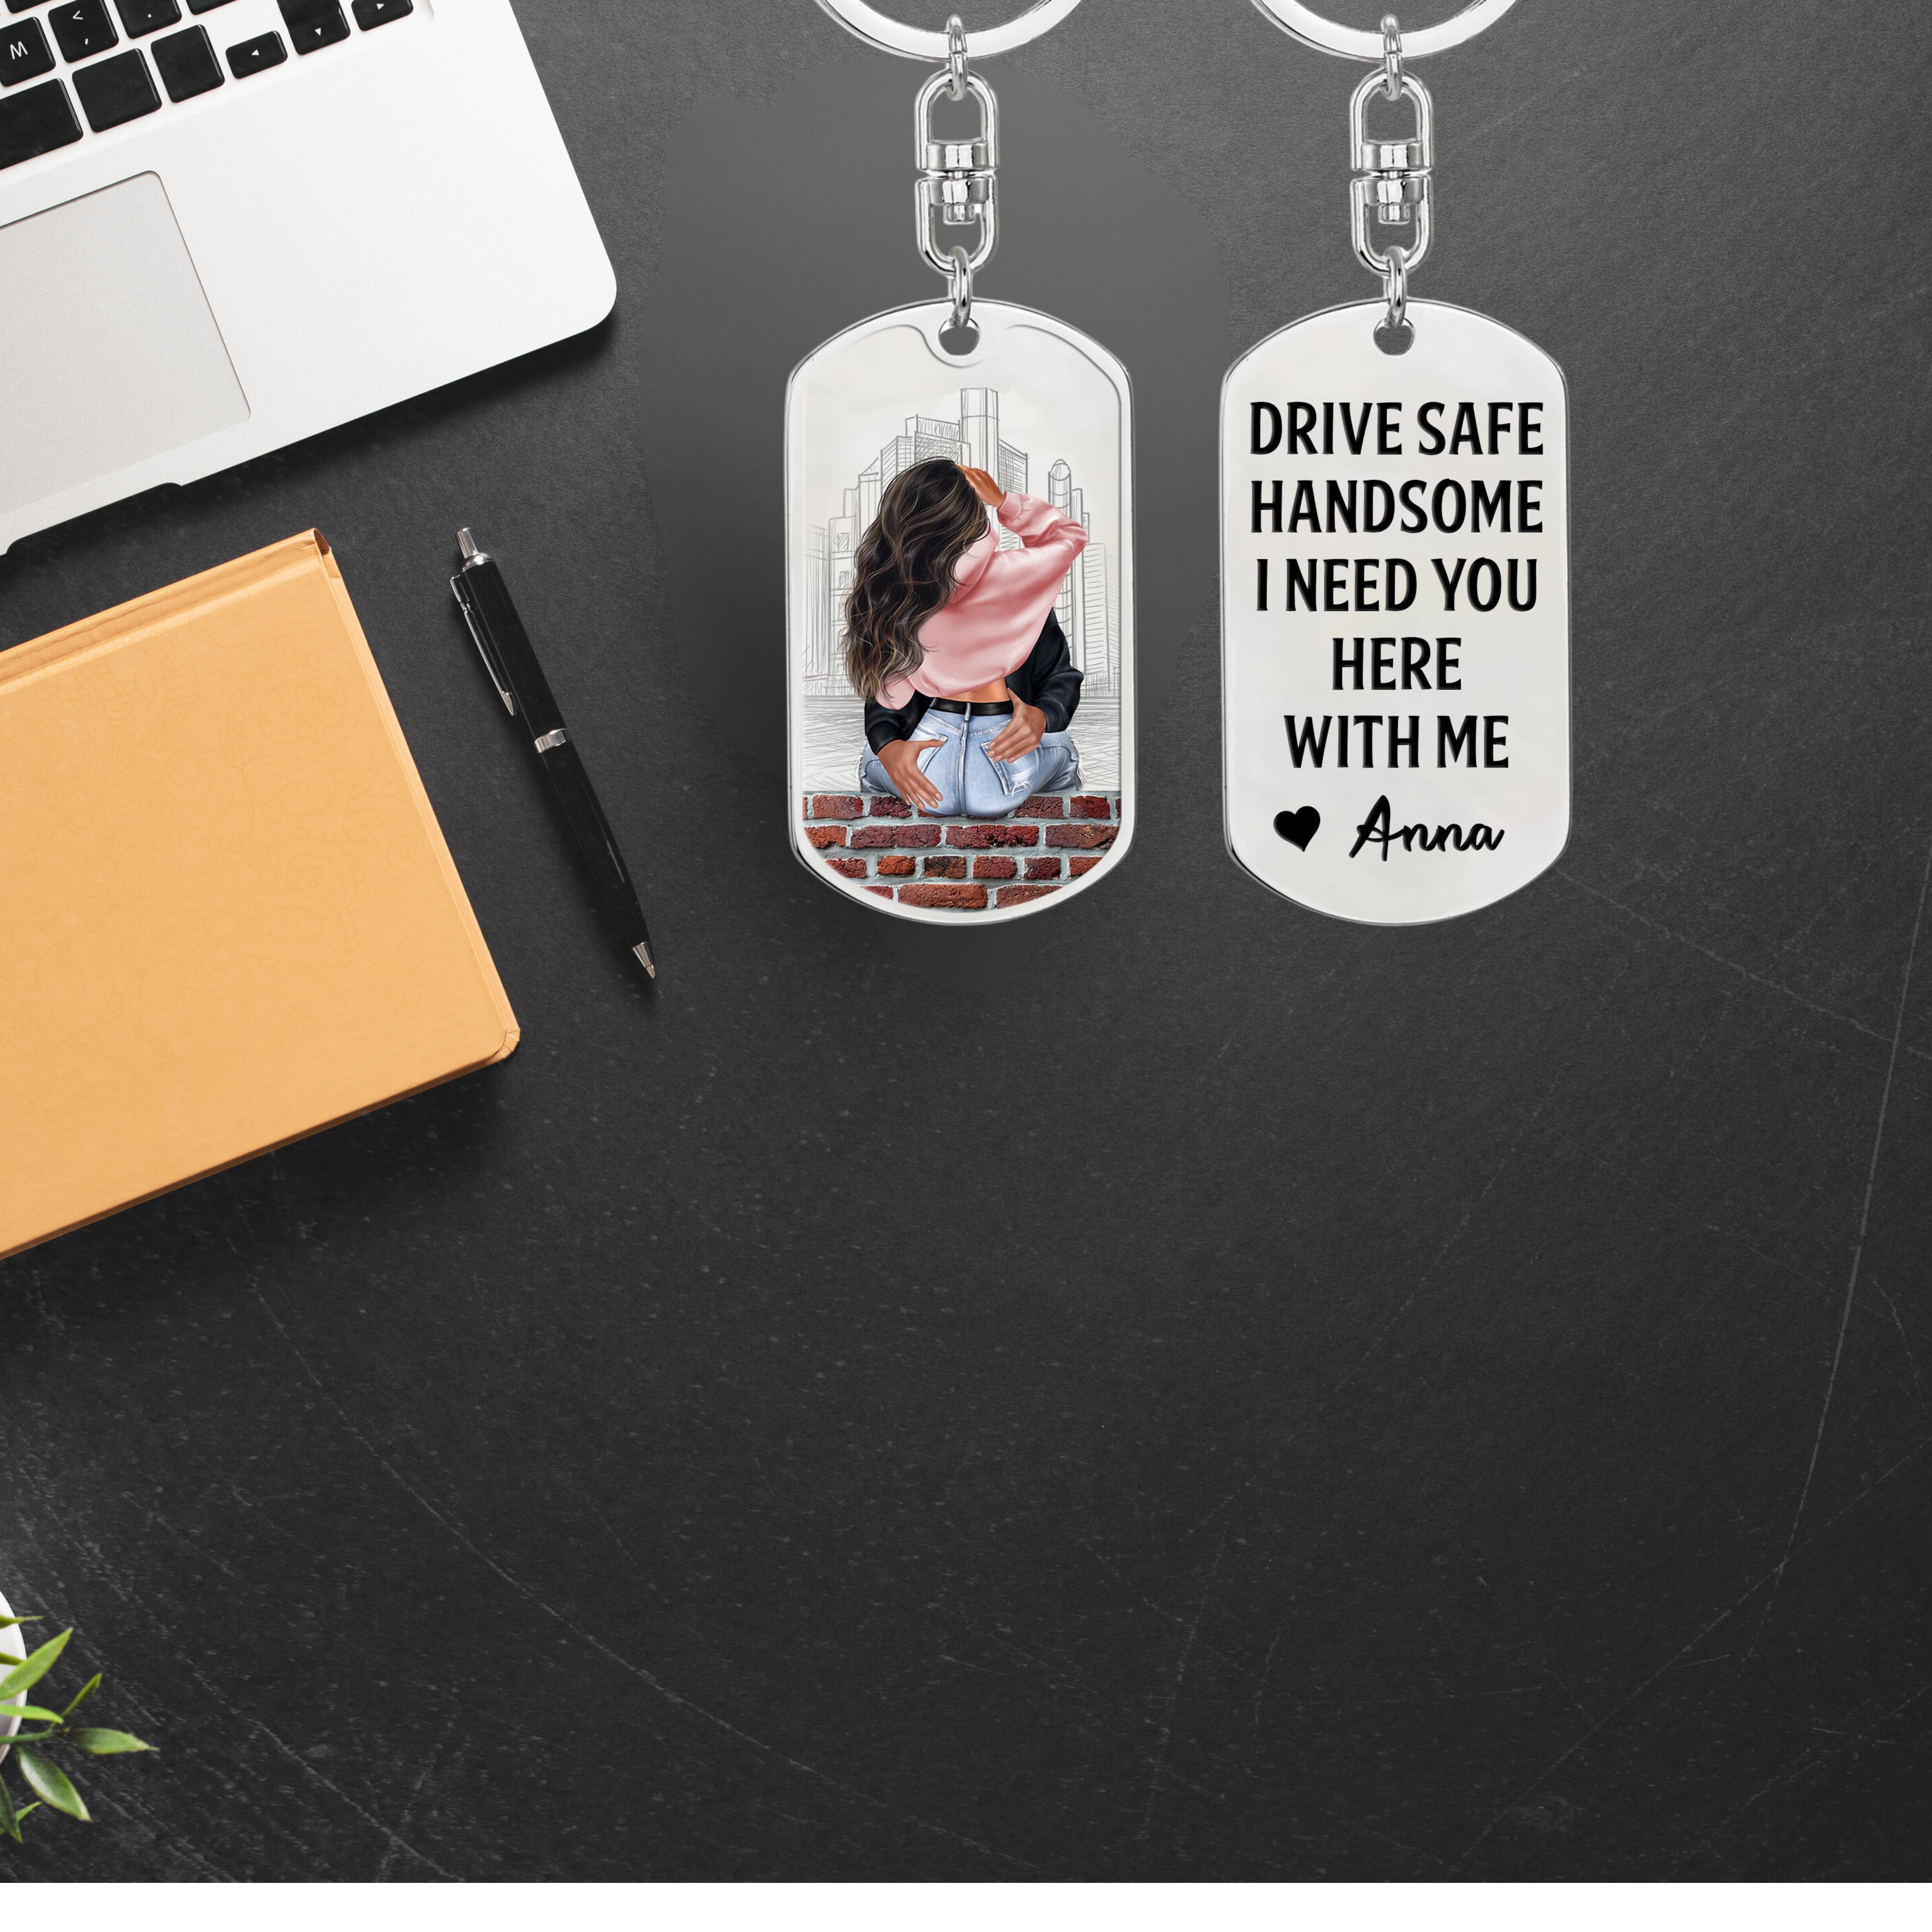 Gift For Him - Drive Safe - Personalized Engraved Stainless Steel Keychain